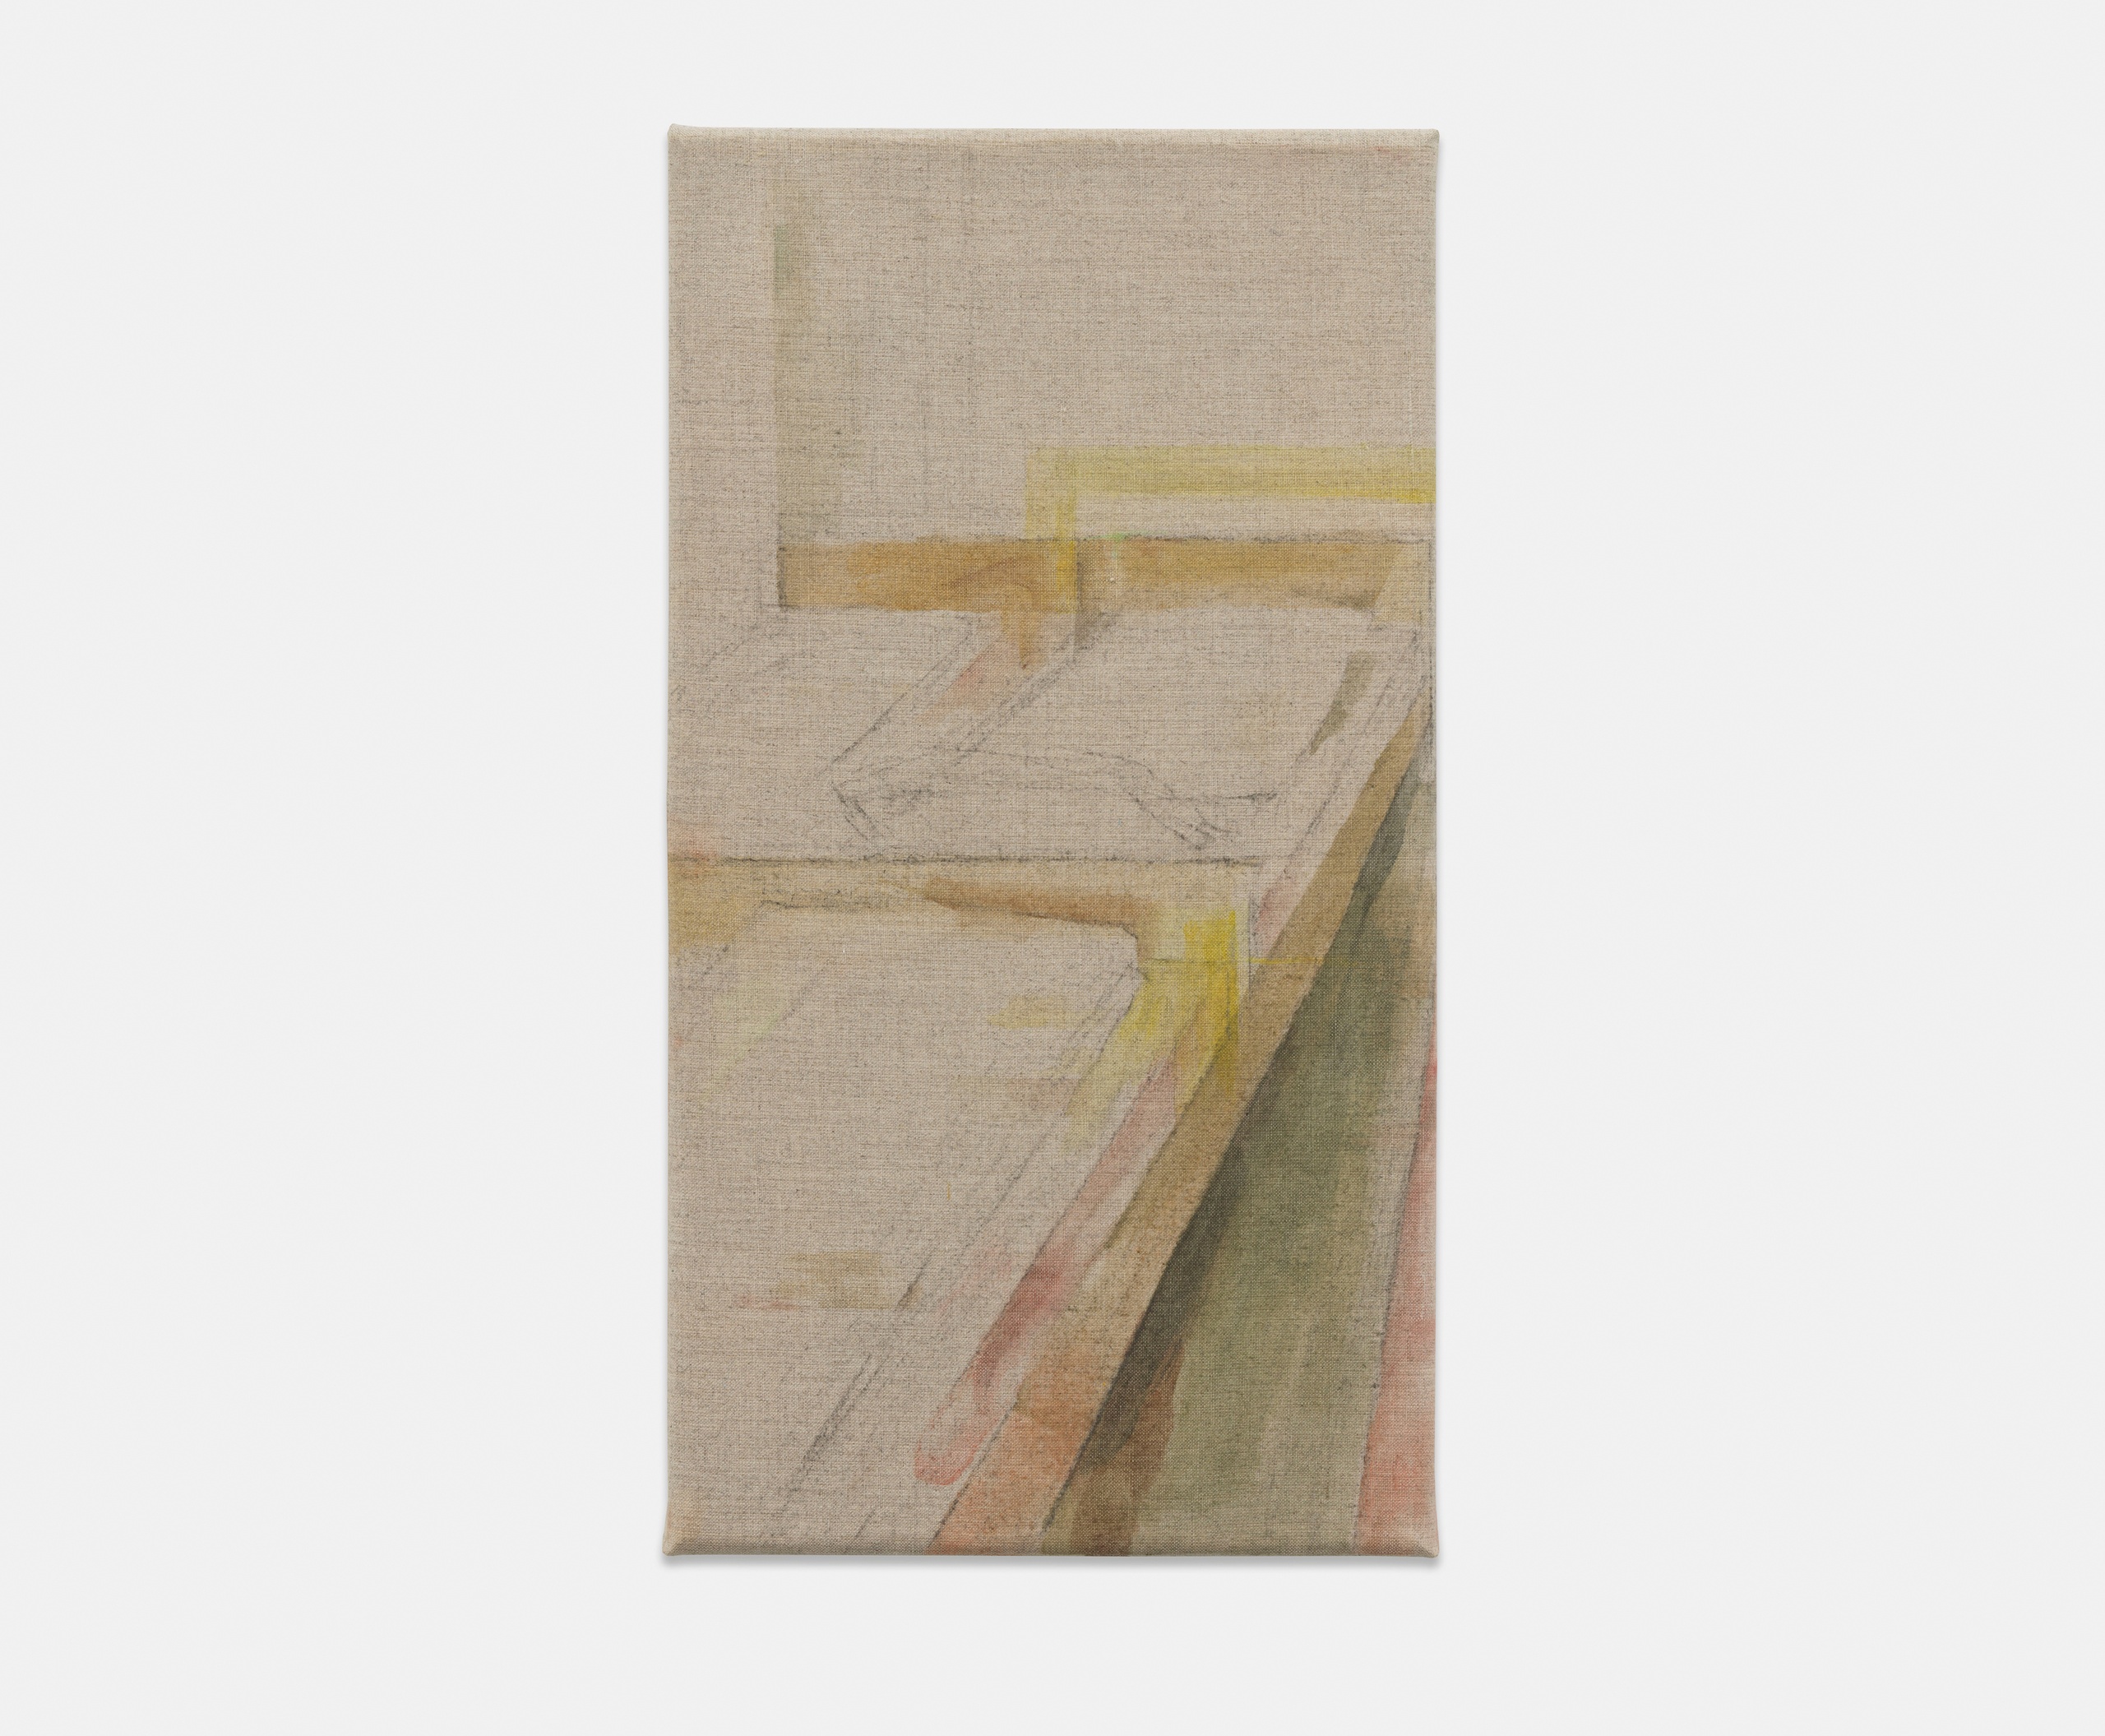 Beaux MendesUntitled, 2023distemper and charcoal on linen37 x 20 cm | 14 1/2 x 7 3/4 in